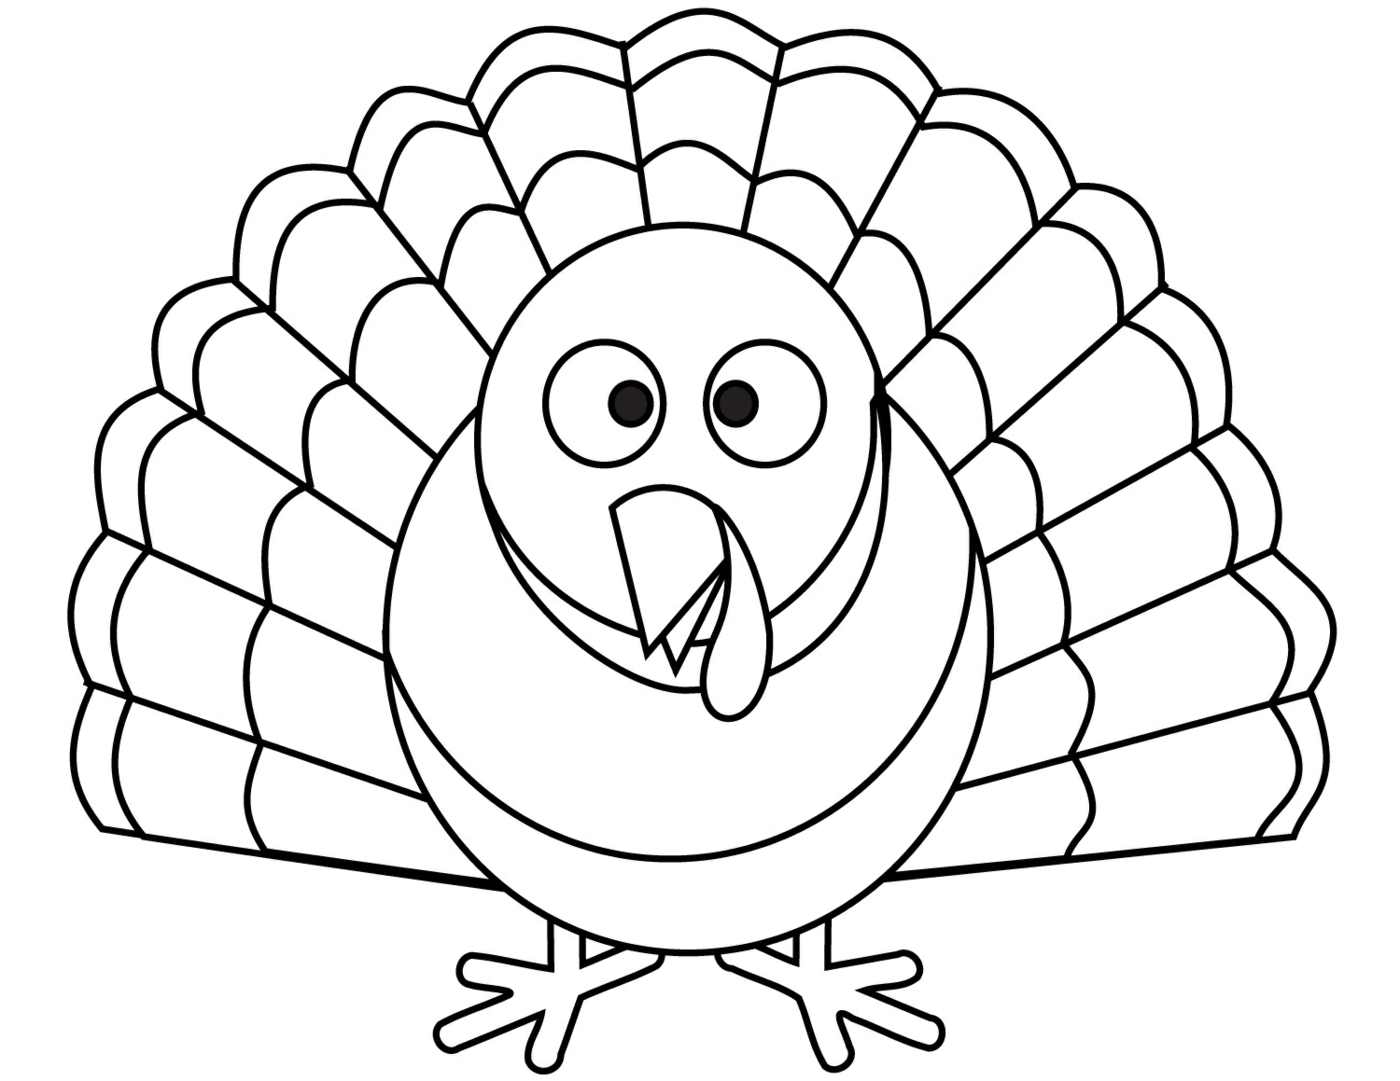 Drawing image from a turkey for decorating in the fall with children